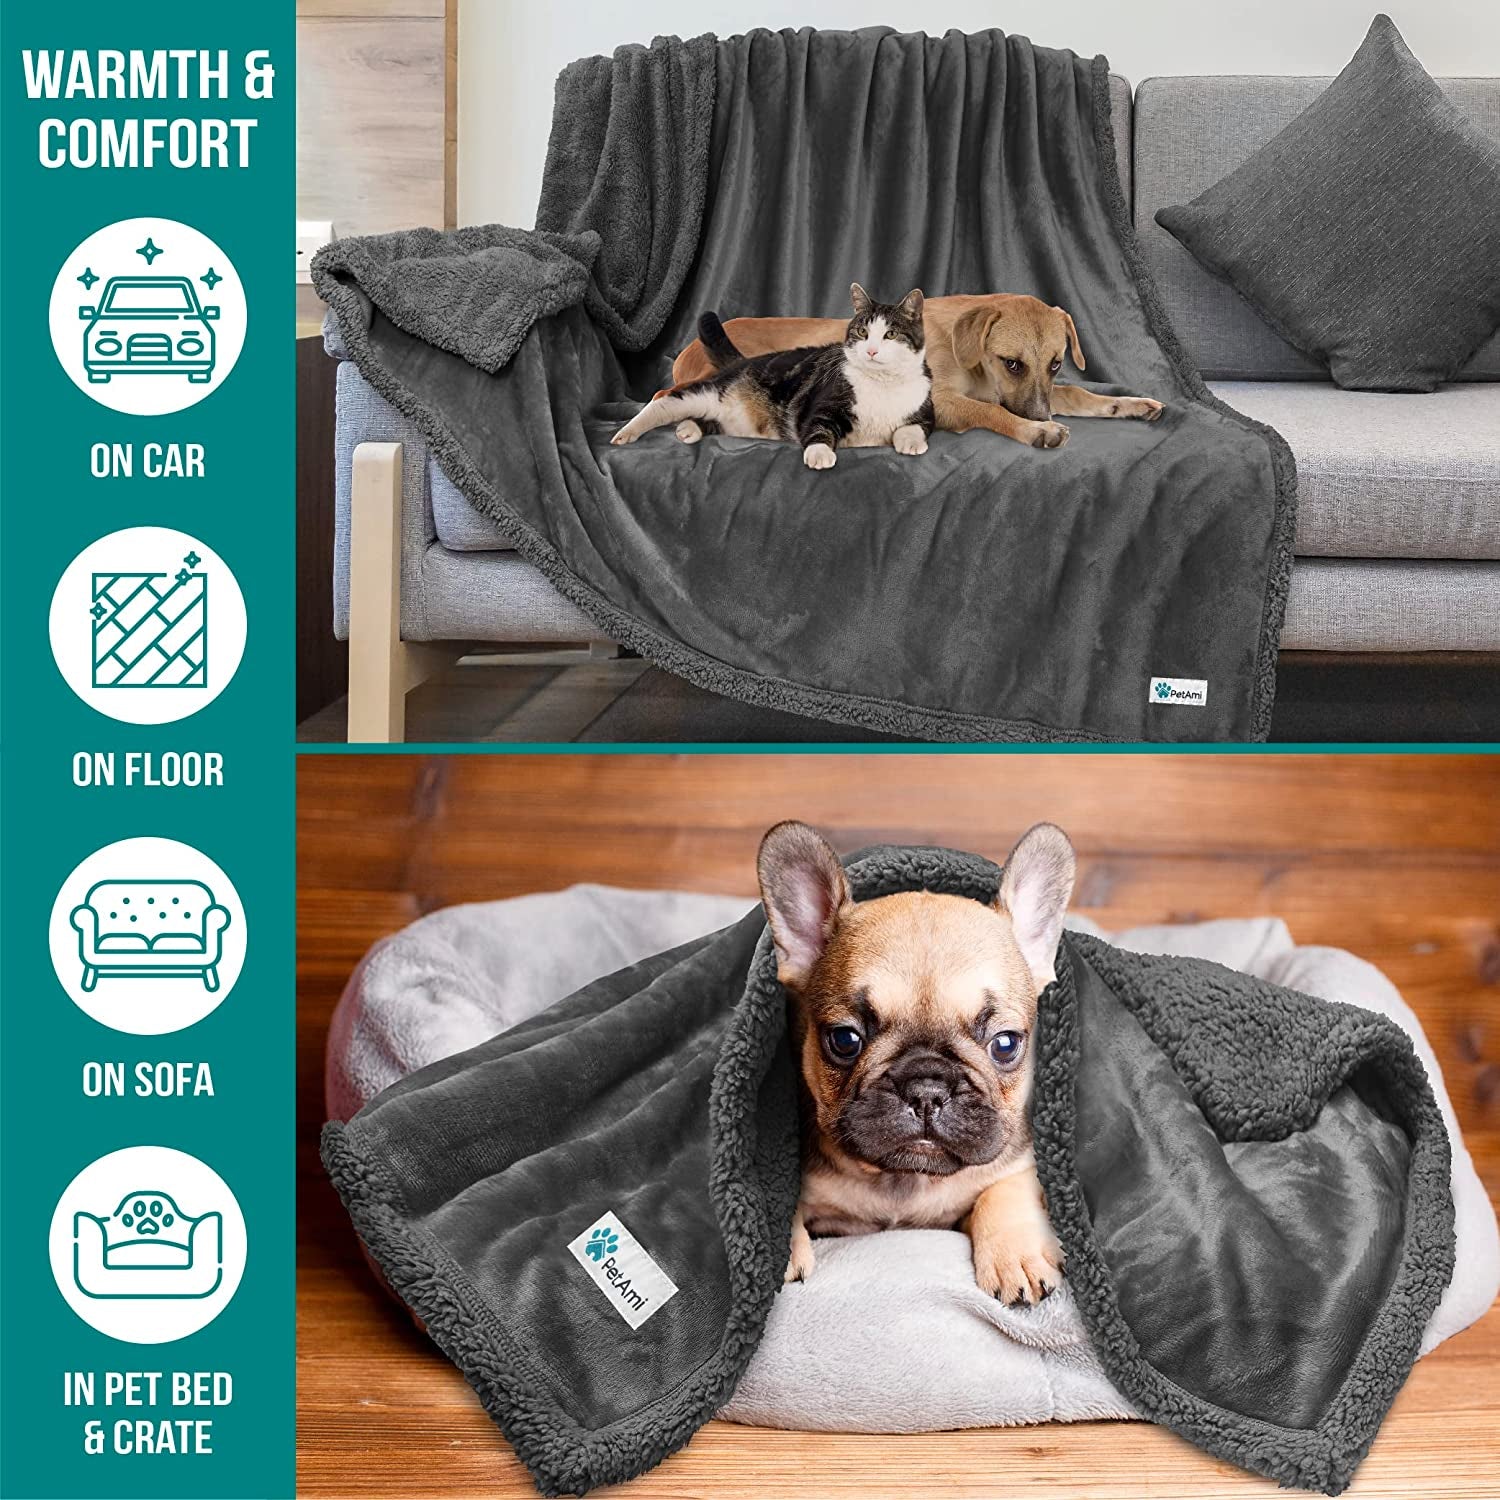 Dog Blanket for Small Medium Dogs, Pet Bed Blanket Cat Puppy Kitten, Fleece Furniture Couch Cover Protector Sofa Car, Soft Sherpa Dog Throw Plush Reversible Washable, Mini 29X40 Solid Dark Gray